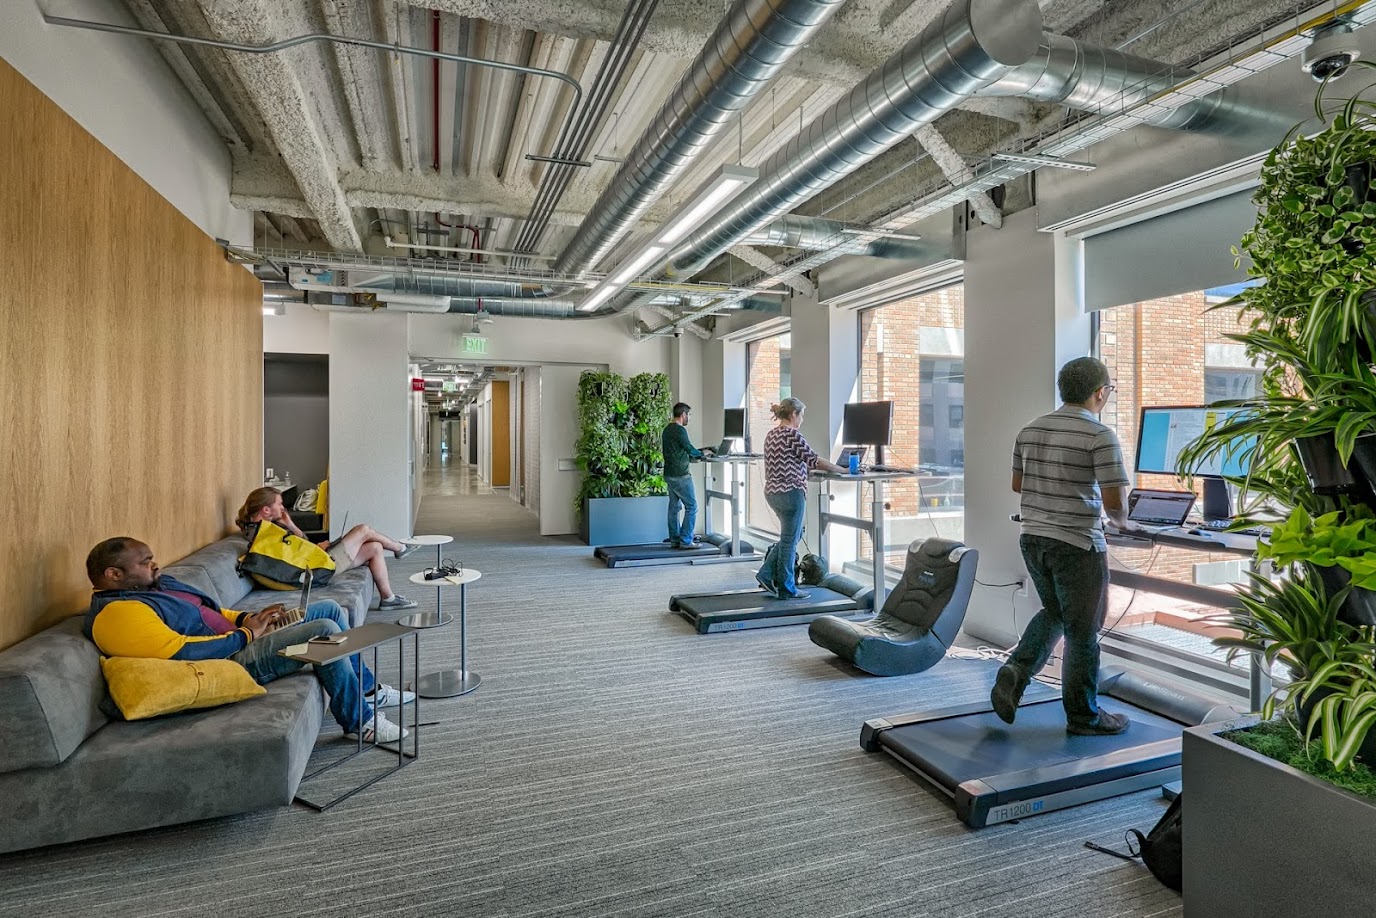 An office with floor to ceiling windows. Treadmills face the window. A few people are walking on the treadmills.